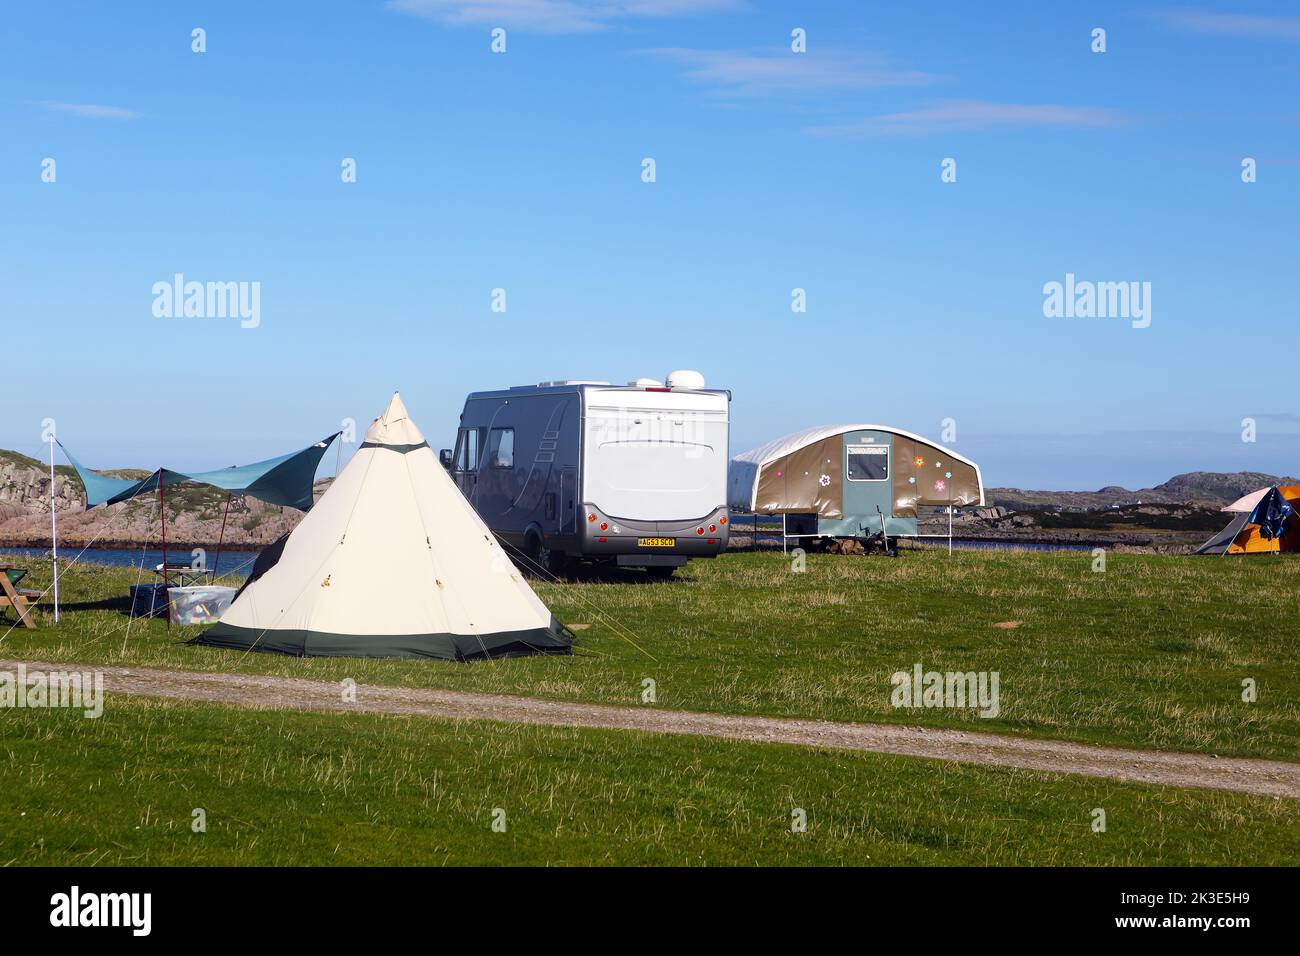 Tents and camper vans at Fidden campsite of the Isle of Mull in the Inner Hebrides of Scotland Stock Photo